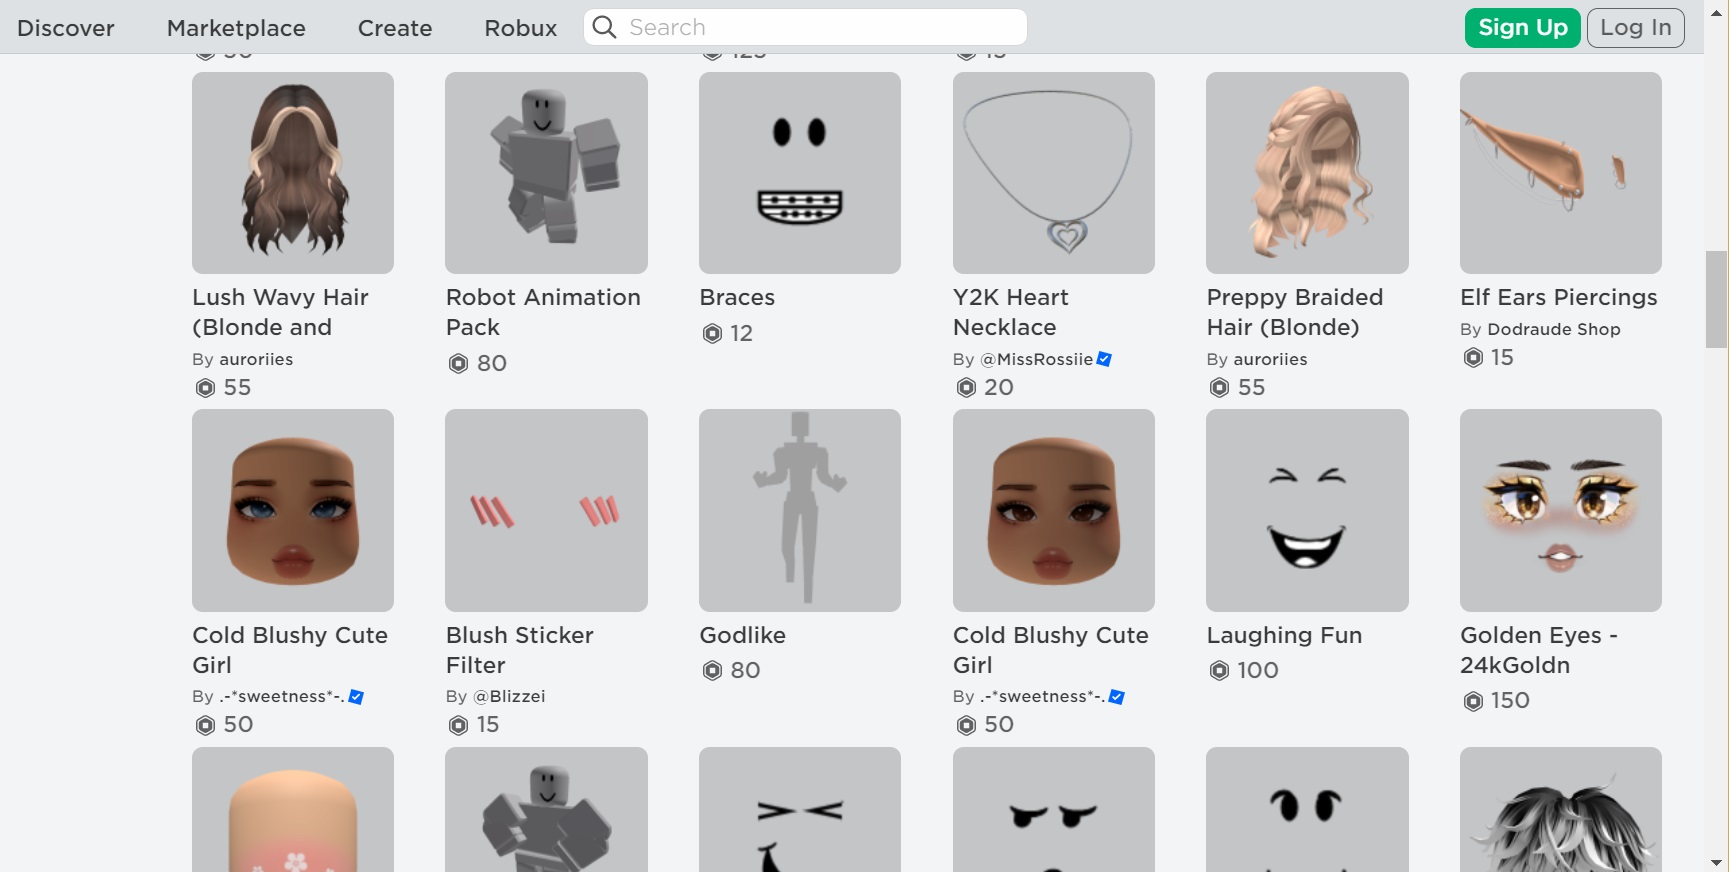 Roblox Details Their Vision for the Creator Economy and Marketplace, by  Bloxy News